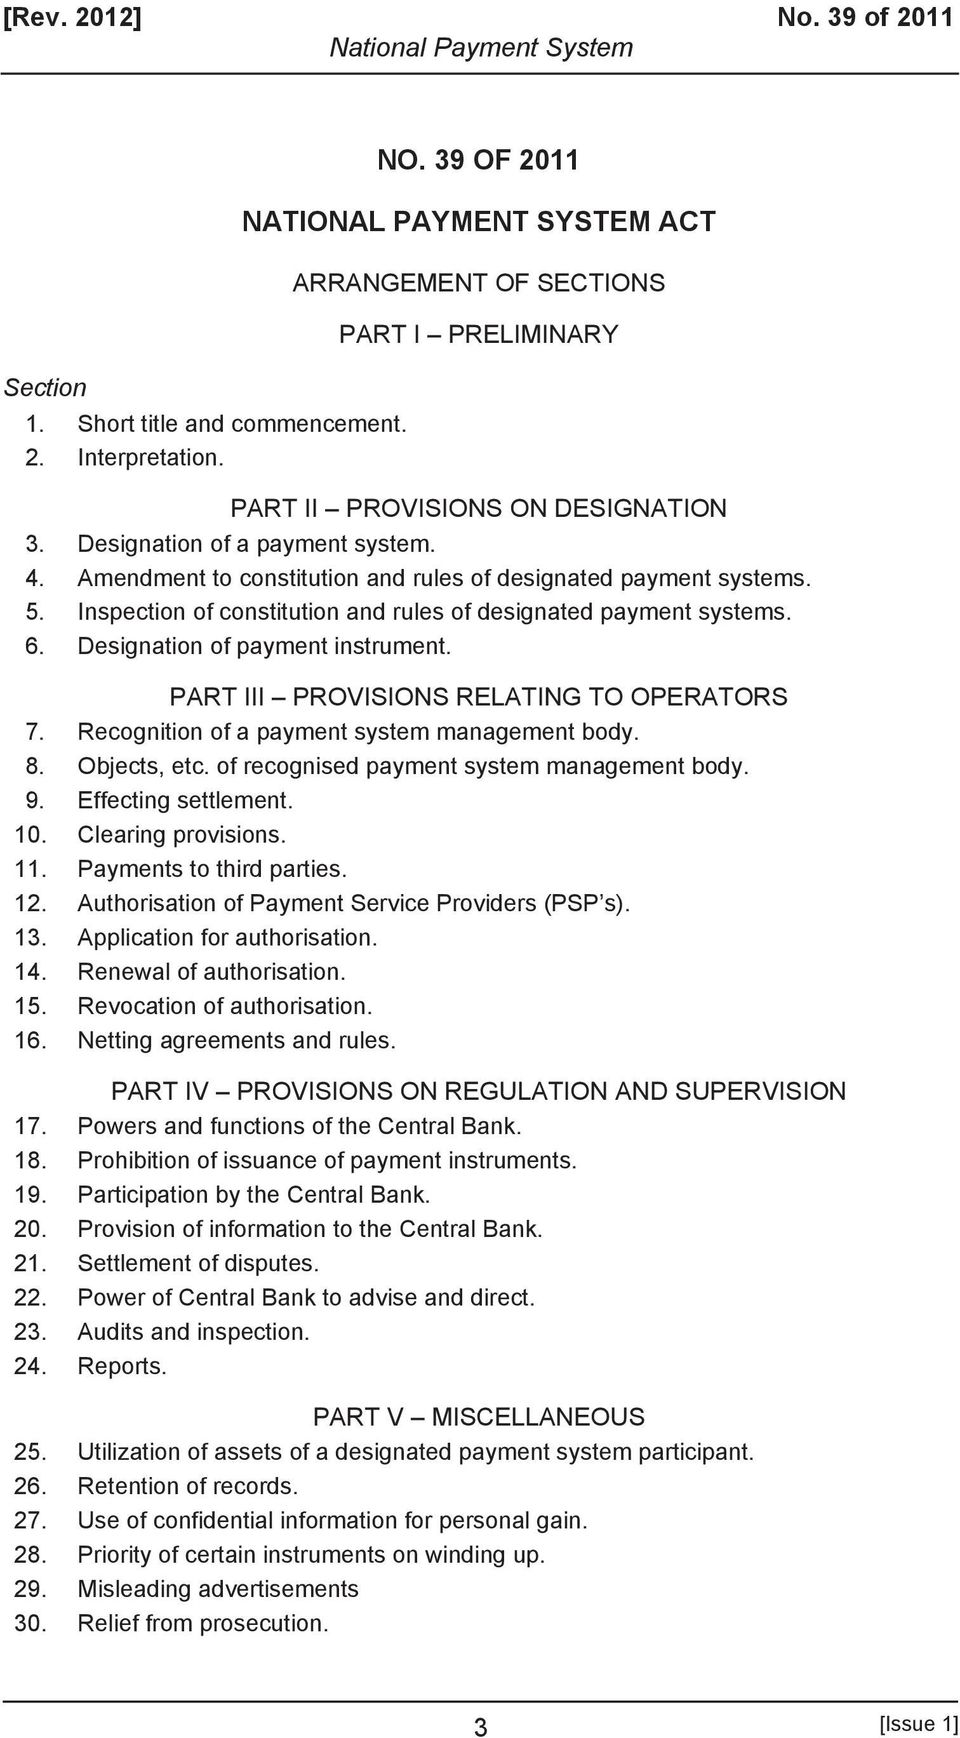 Amendment to constitution and rules of designated payment systems. 5. Inspection of constitution and rules of designated payment systems. 6. Designation of payment instrument.